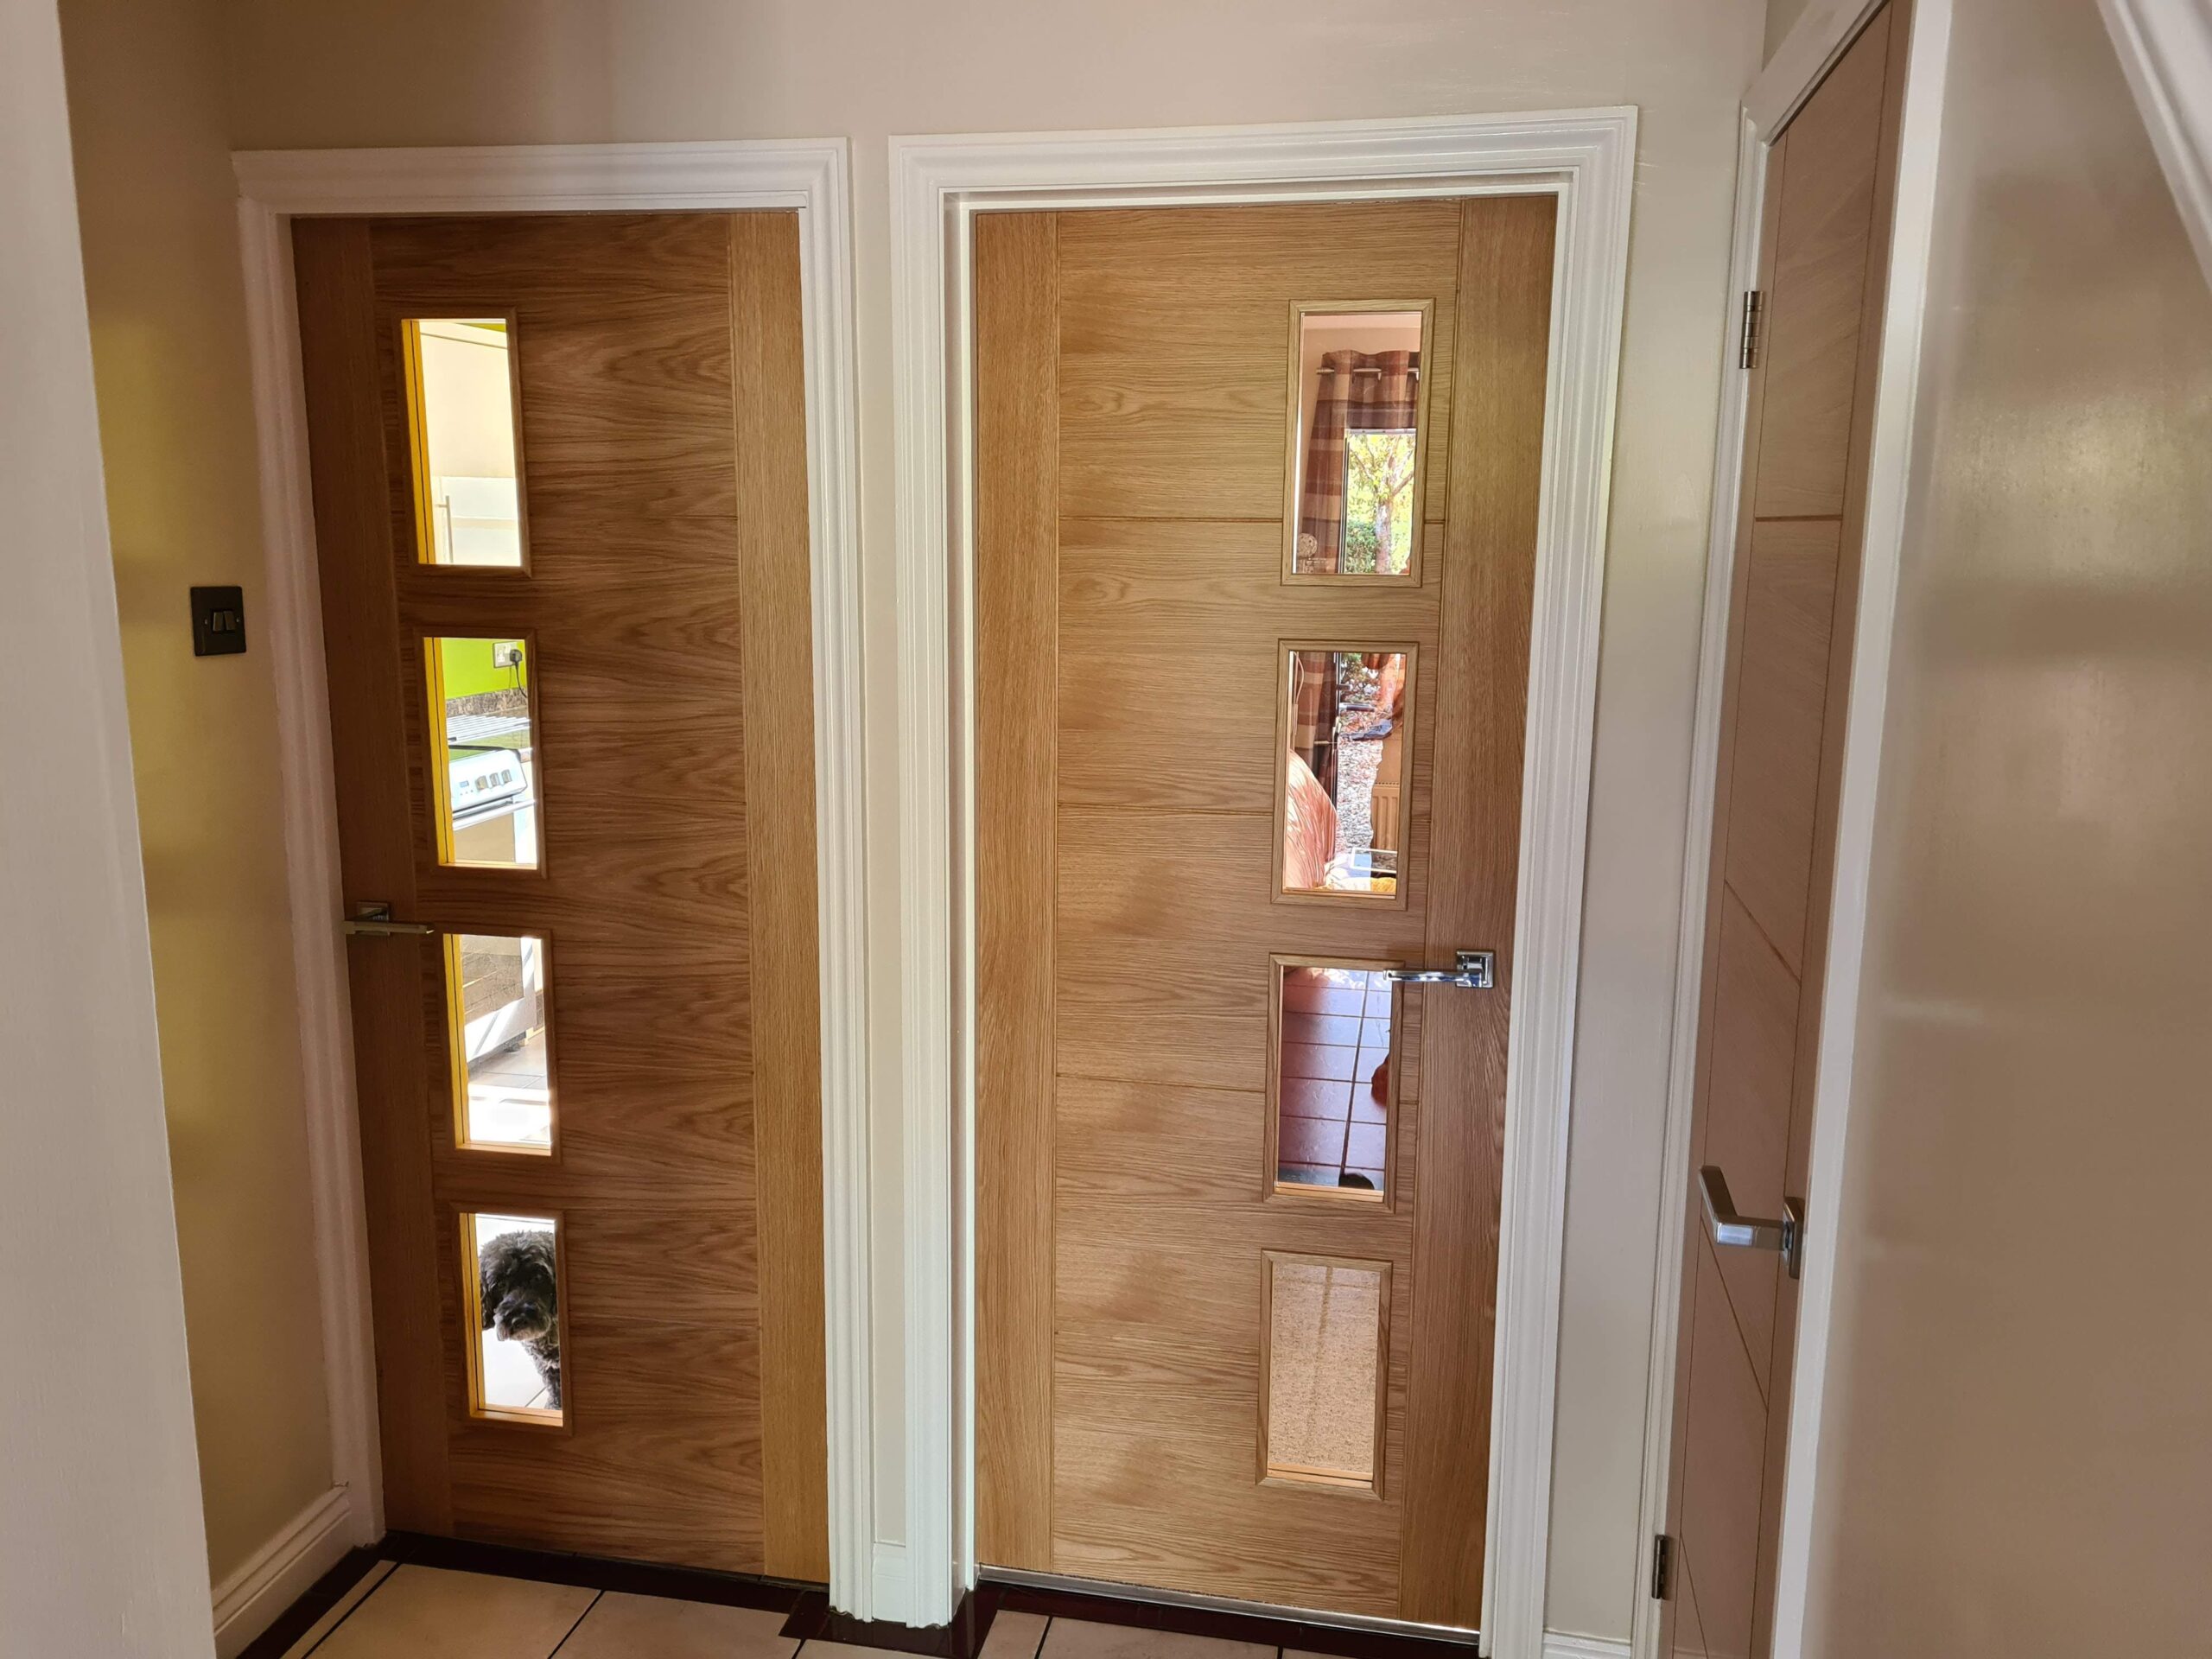 doors|carpentry|wood|house|improvements|home|mirror|glass